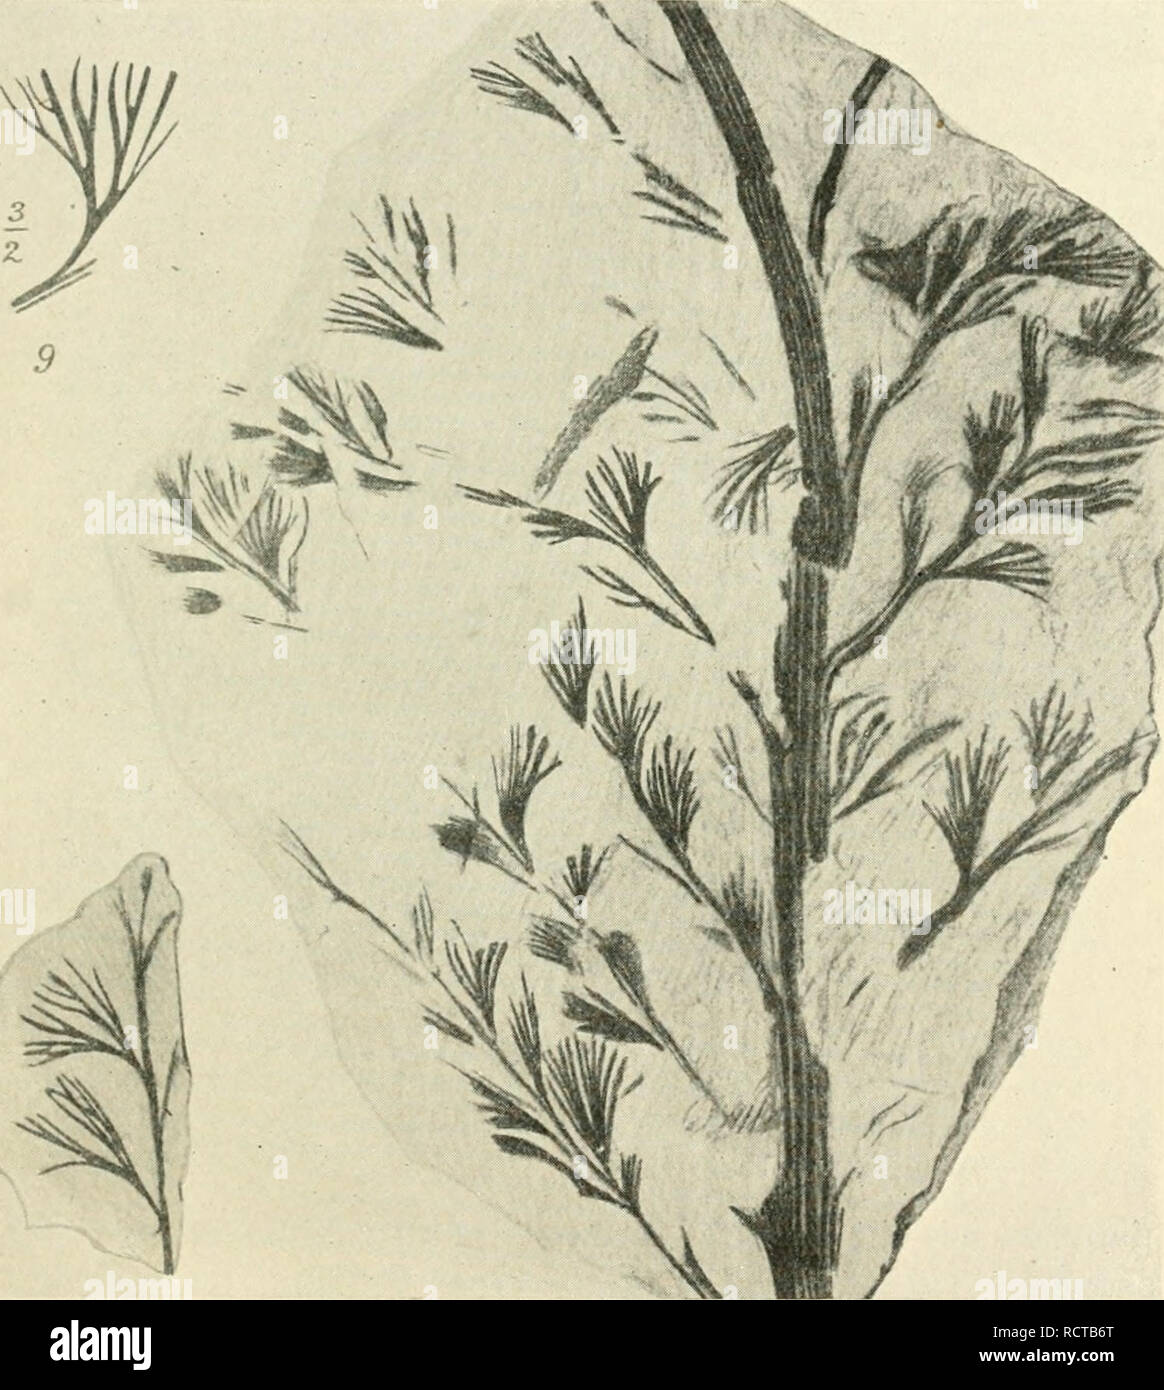 . Devonian floras; a study of the origin of Cormophyta. Paleobotany -- Devonian. vj ARCHAEOPTERIS Pteropsida. 59 Archaeopteris, Dawson, 1871^ (Figs. 28-32). Fronds of large size, bipinnate with a stipiilar base, stipules in pairs, adnatc, and a ranicntum on the lower part of the petiole. Sterile pinnules typi- cally obo'ate or ovatc-cuneate, entire ortoothed, with a flabellate. Fig. .31. Ardtaeoplerisfissilis, Schmalli., from tlic Upper Devonian of EUes- mereland. (Nat. size except fig. marked 9, which is x|.) After Nathorst (1904). 1 See Carruthers (1872); Kidston (1888); Nathorst (1902) and Stock Photo